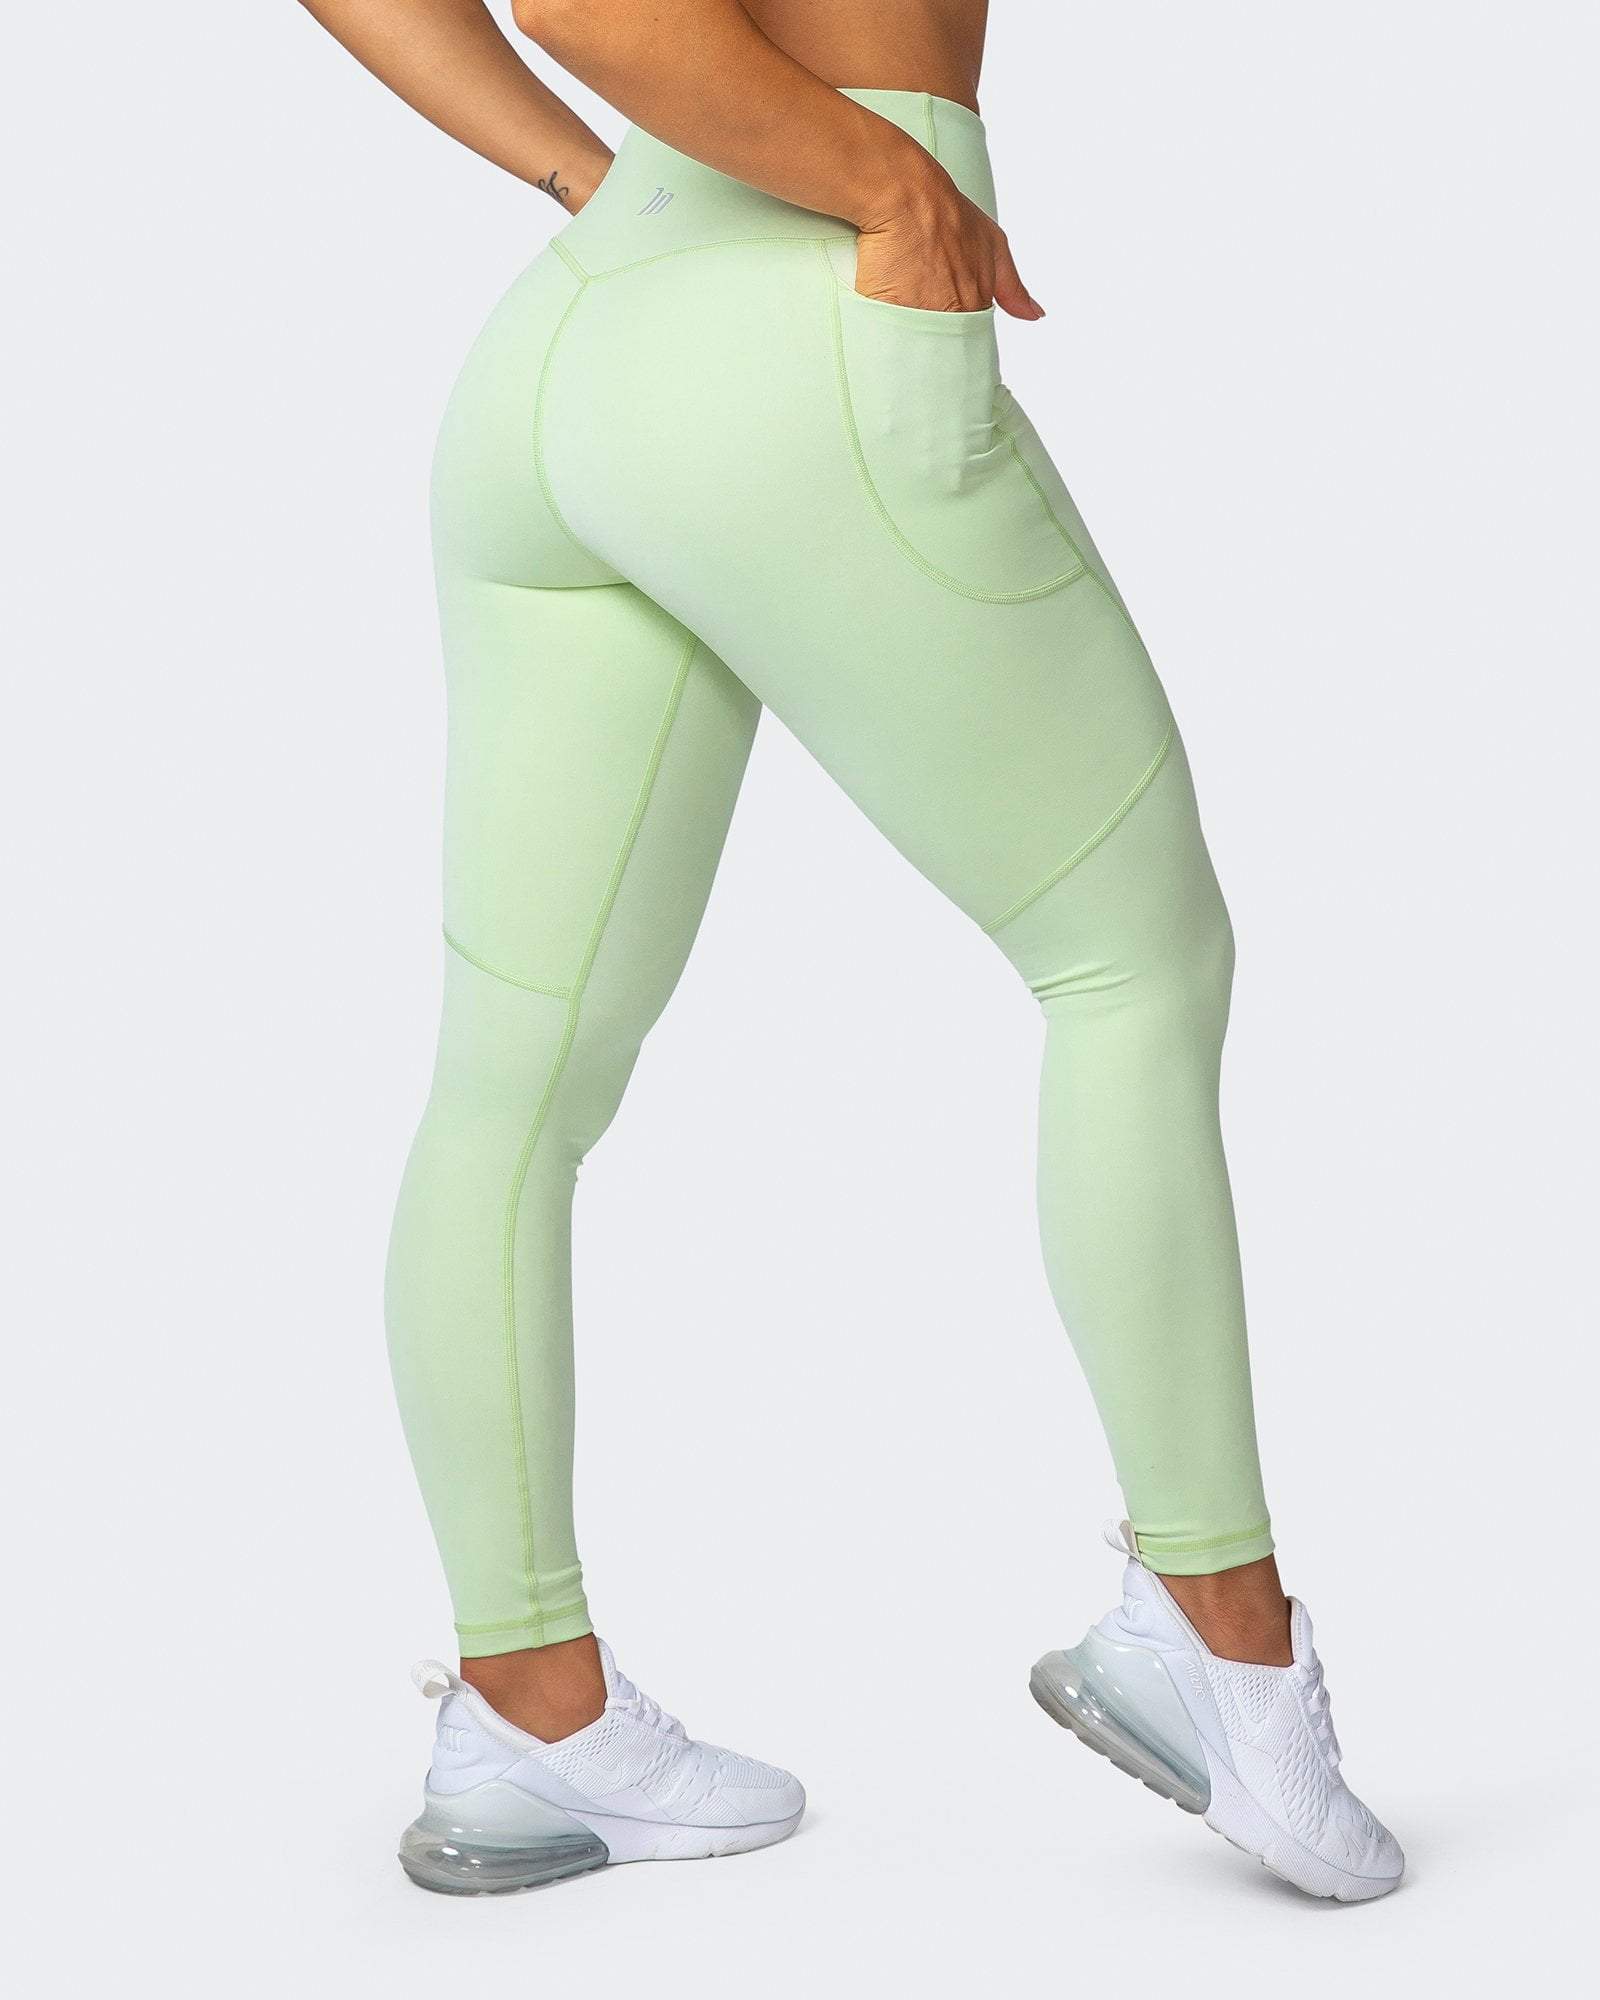 musclenation Tights SUPERIOR SQUAT POCKET ANKLE LENGTH LEGGINGS Minty